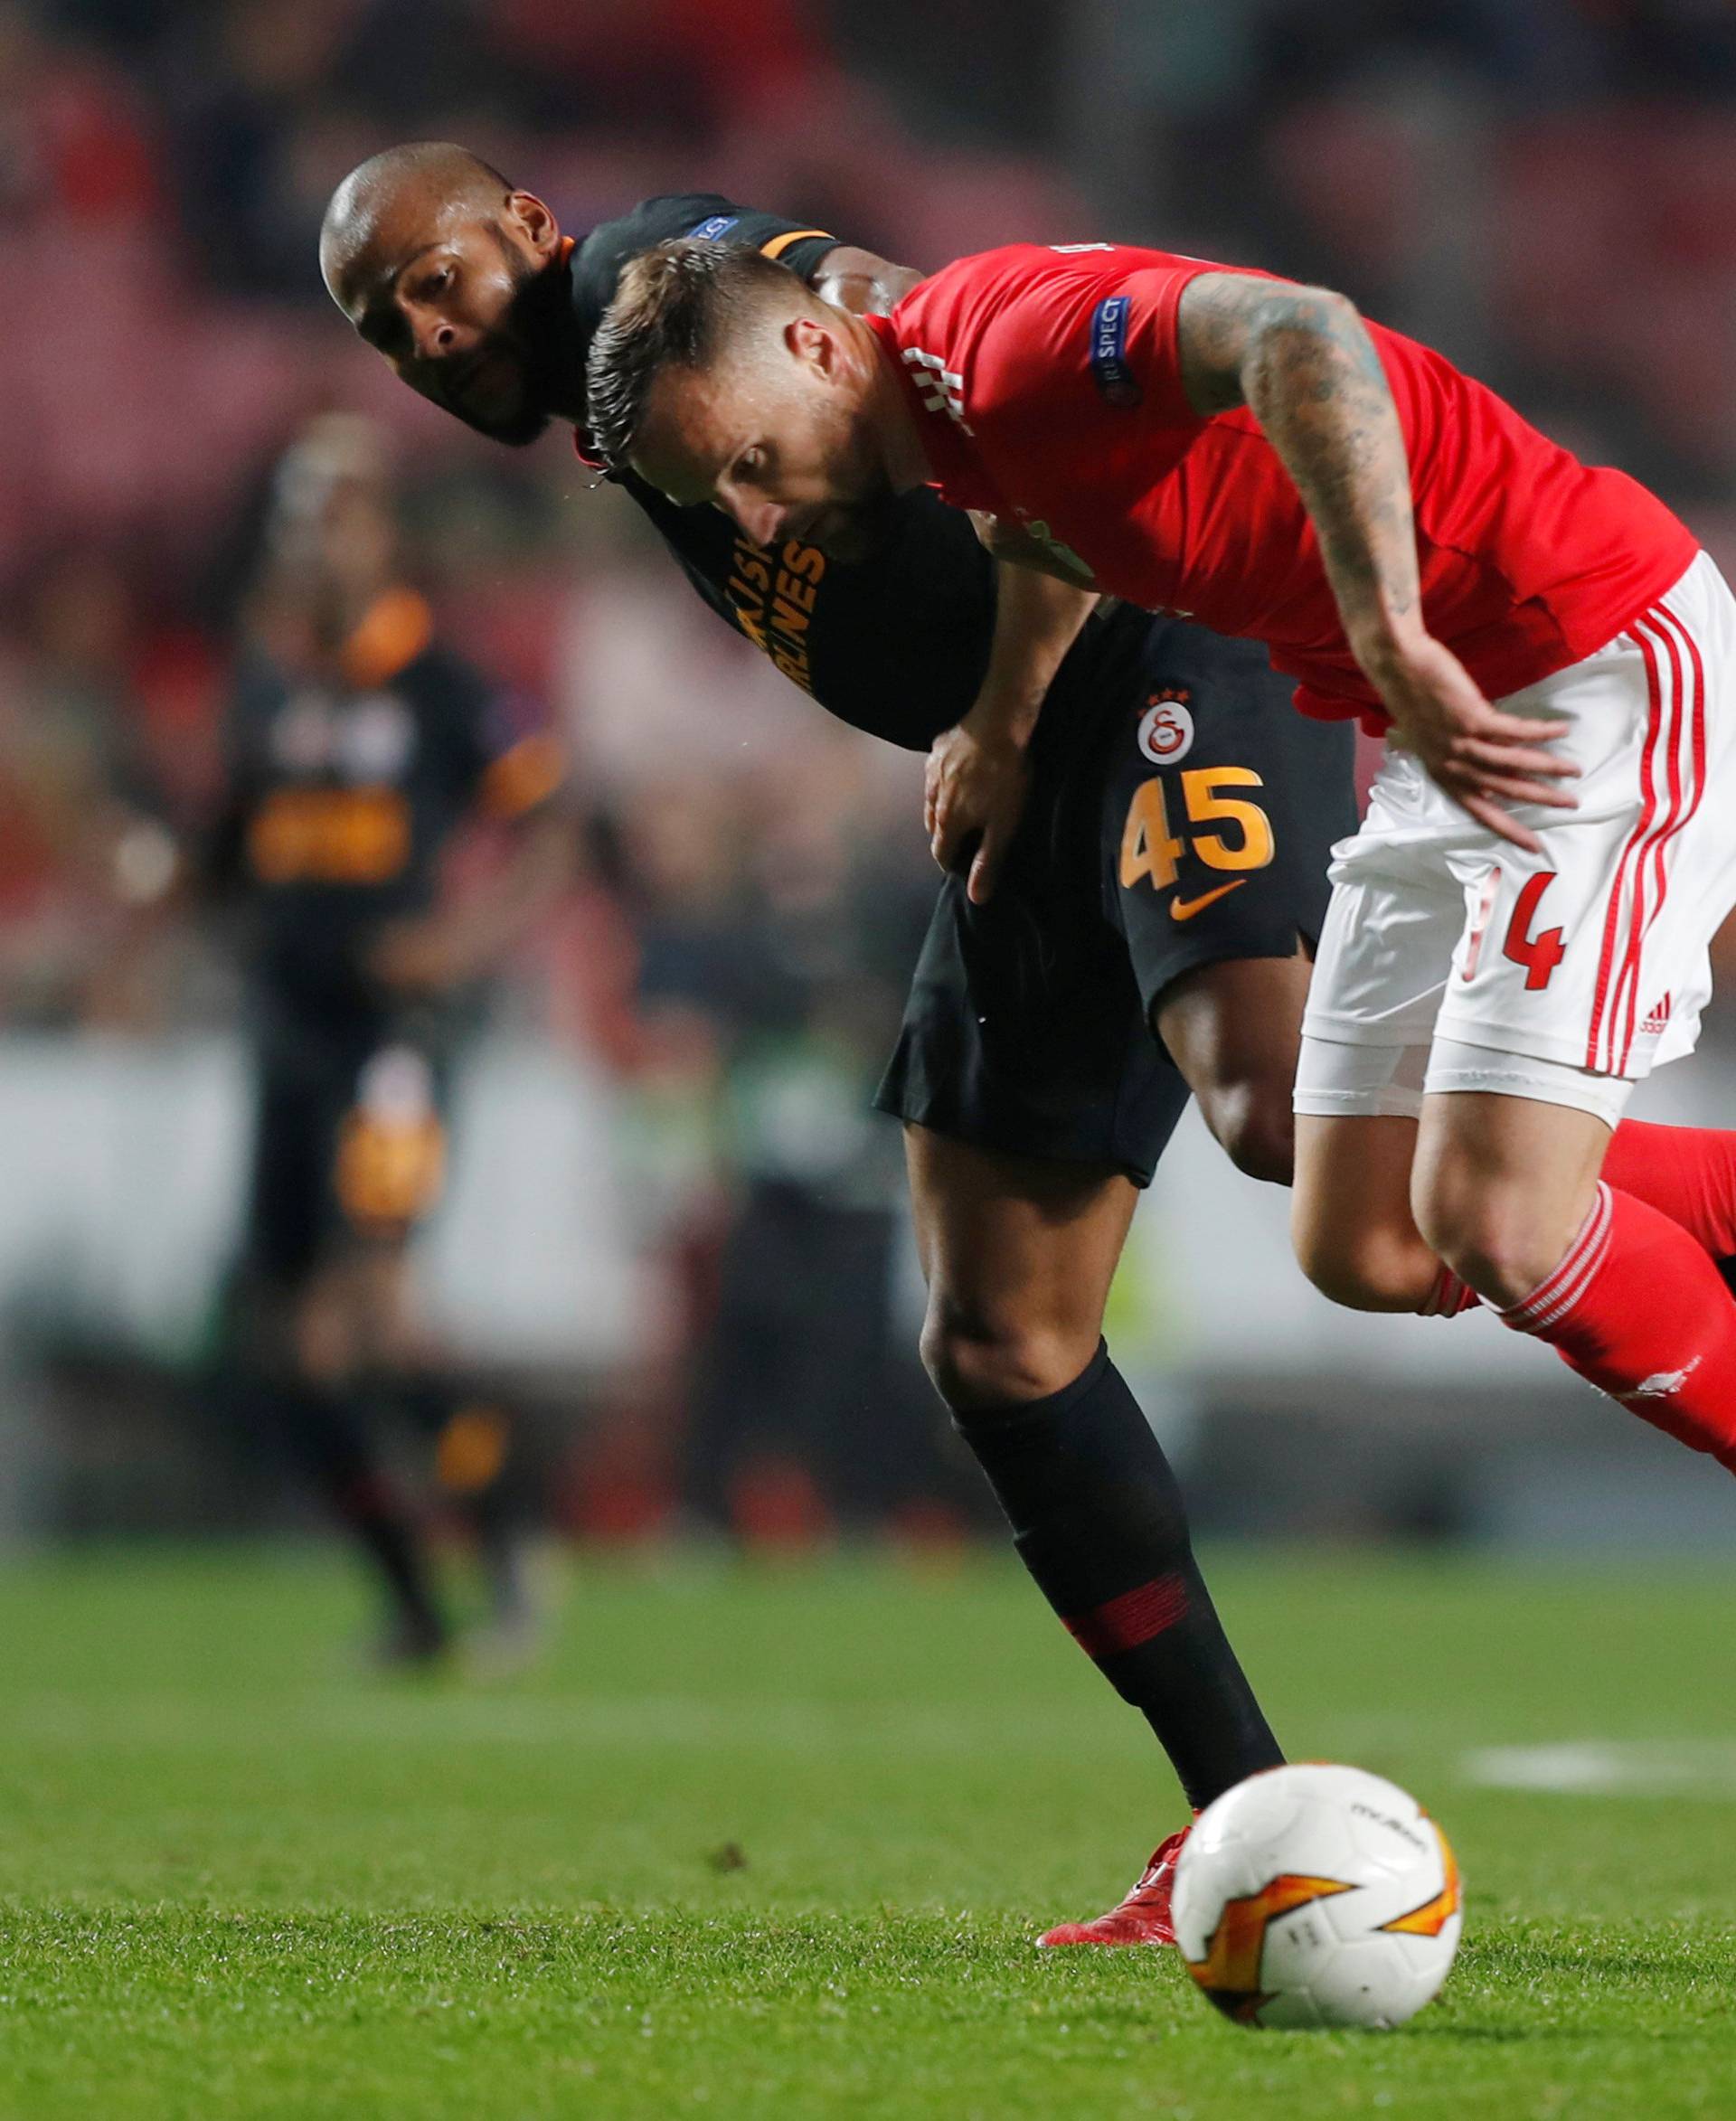 Europa League - Round of 32 Second Leg - Benfica v Galatasaray